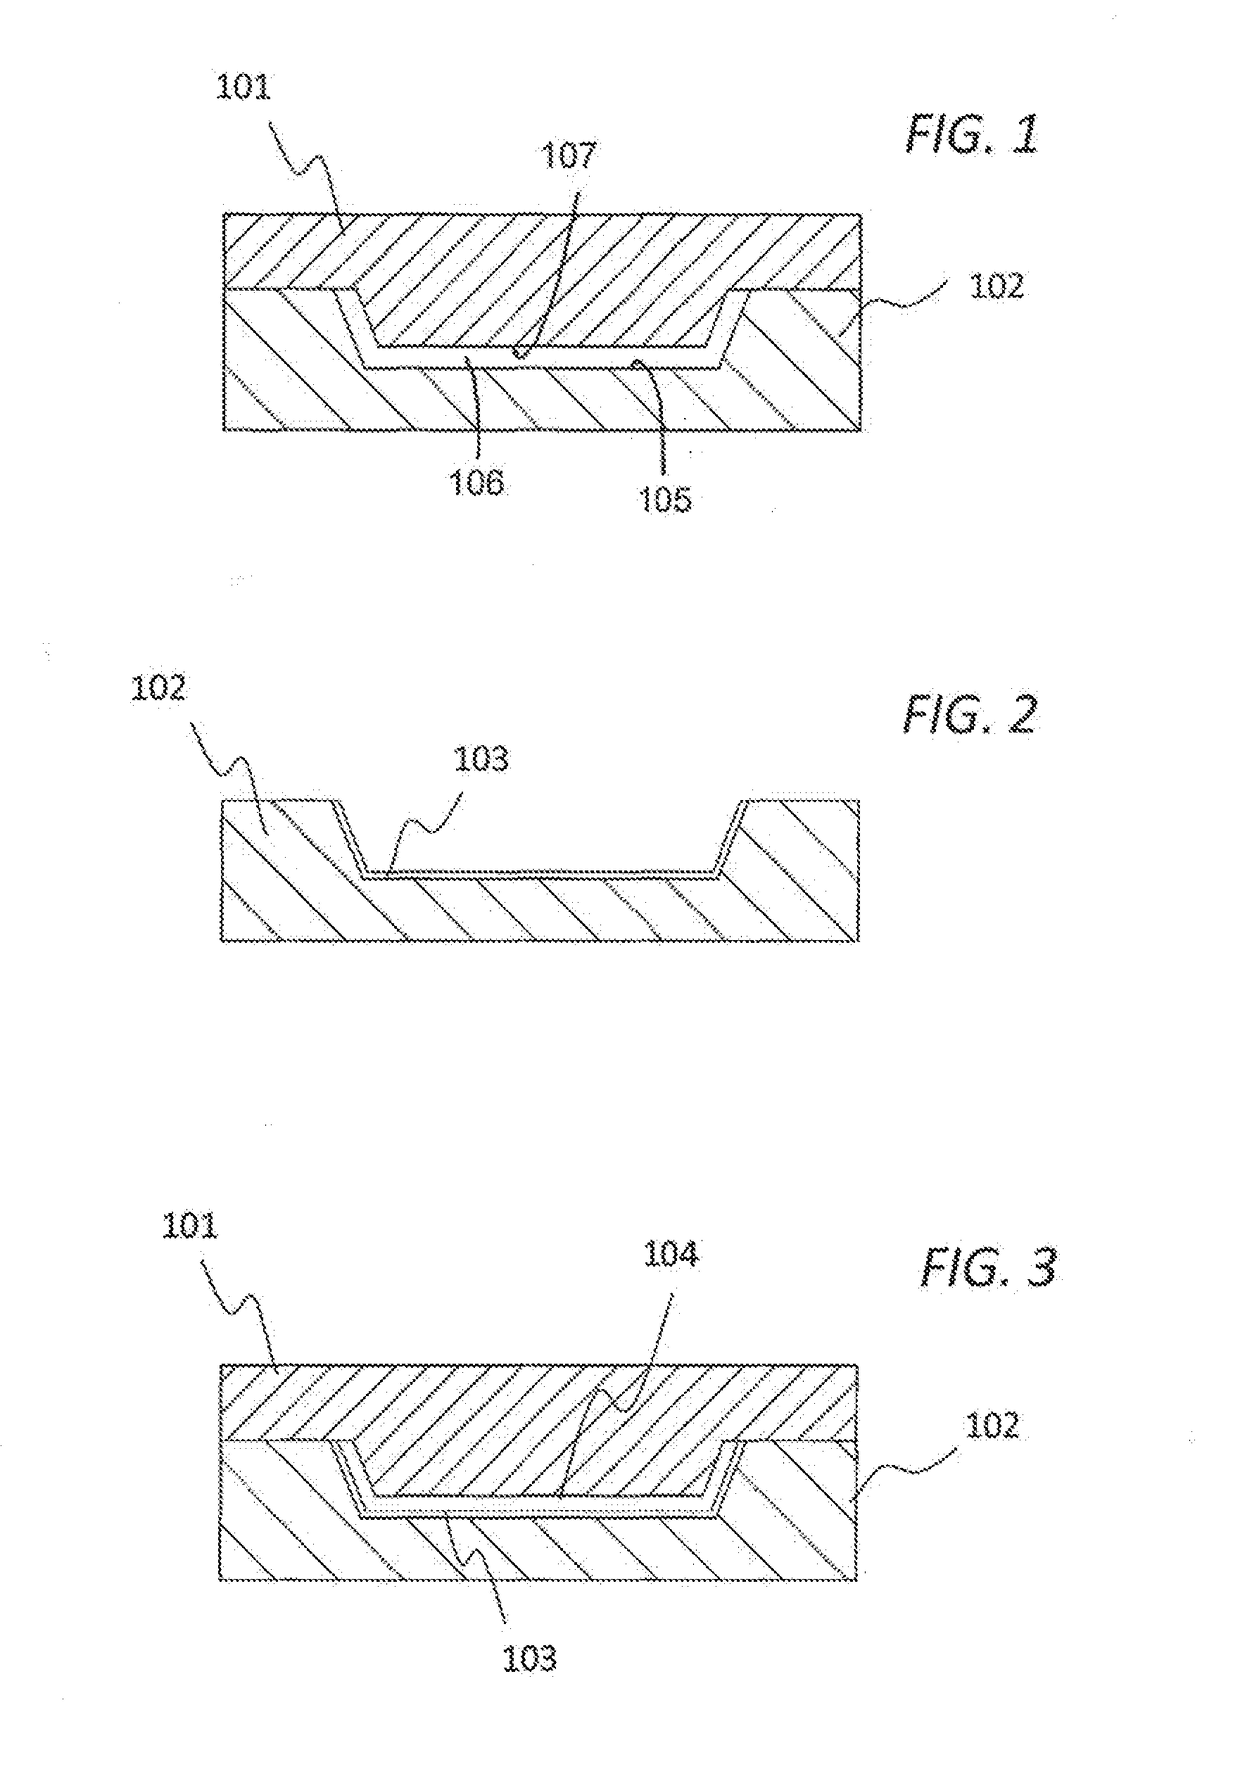 Method for manufacturing composite part of polymer and metal